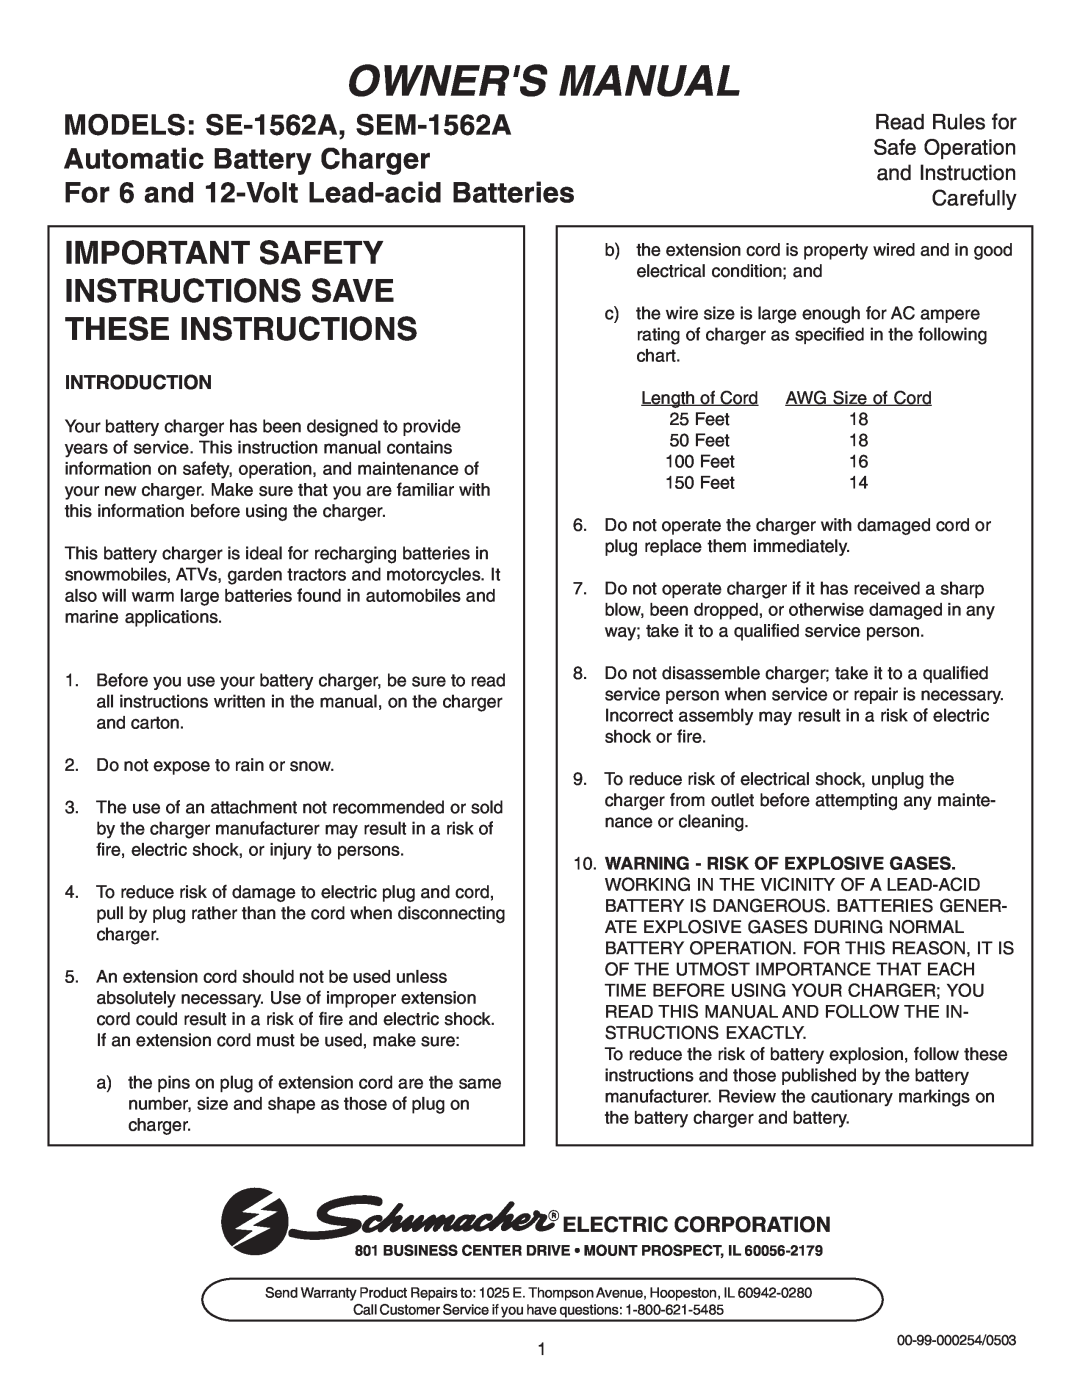 Schumacher SE-1562A owner manual Important Safety Instructions Save These Instructions, Introduction, Electric Corporation 